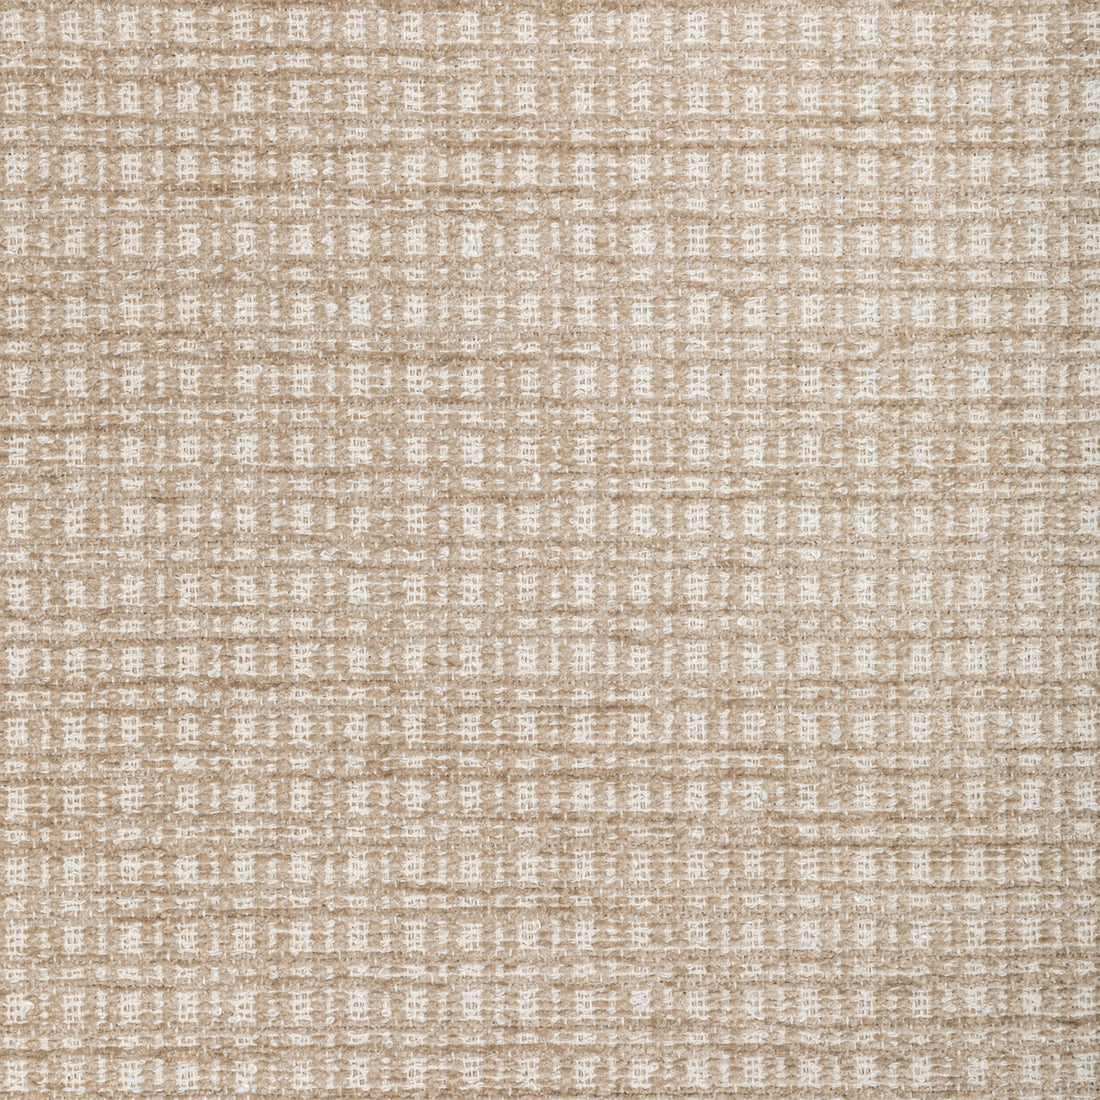 Landiers Texture fabric in cream color - pattern 8022123.1116.0 - by Brunschwig &amp; Fils in the Chambery Textures III collection